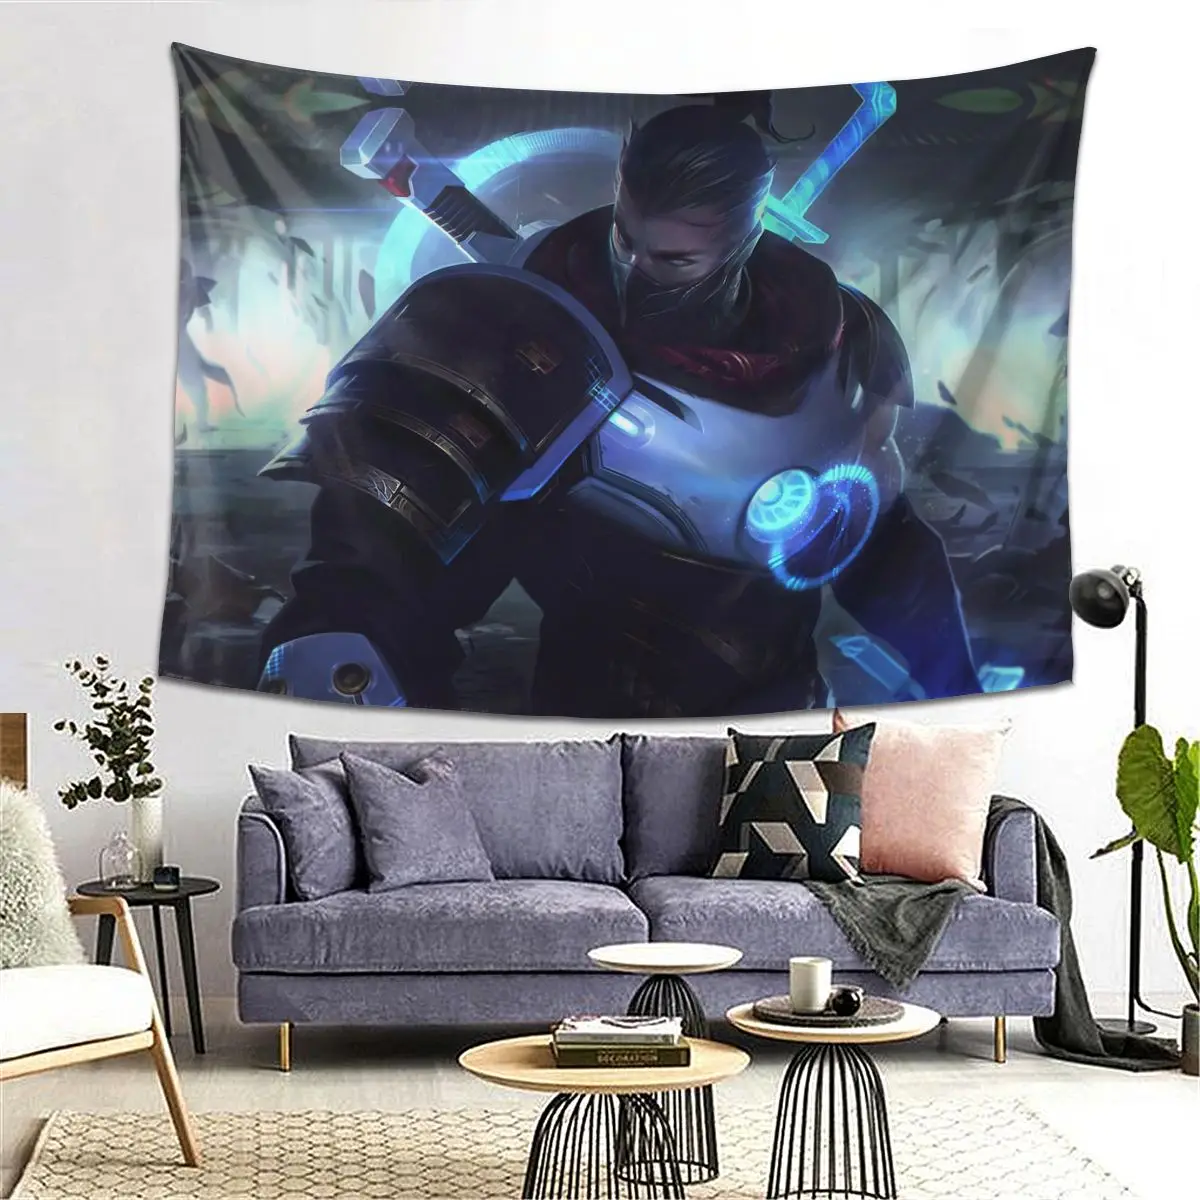 

League Of Legends Tapestry Ornament Wall Hanging Tapestry Carpet Xmas Home Deocr Yoga Pad Bedspread Beach Mat Gift tapiz